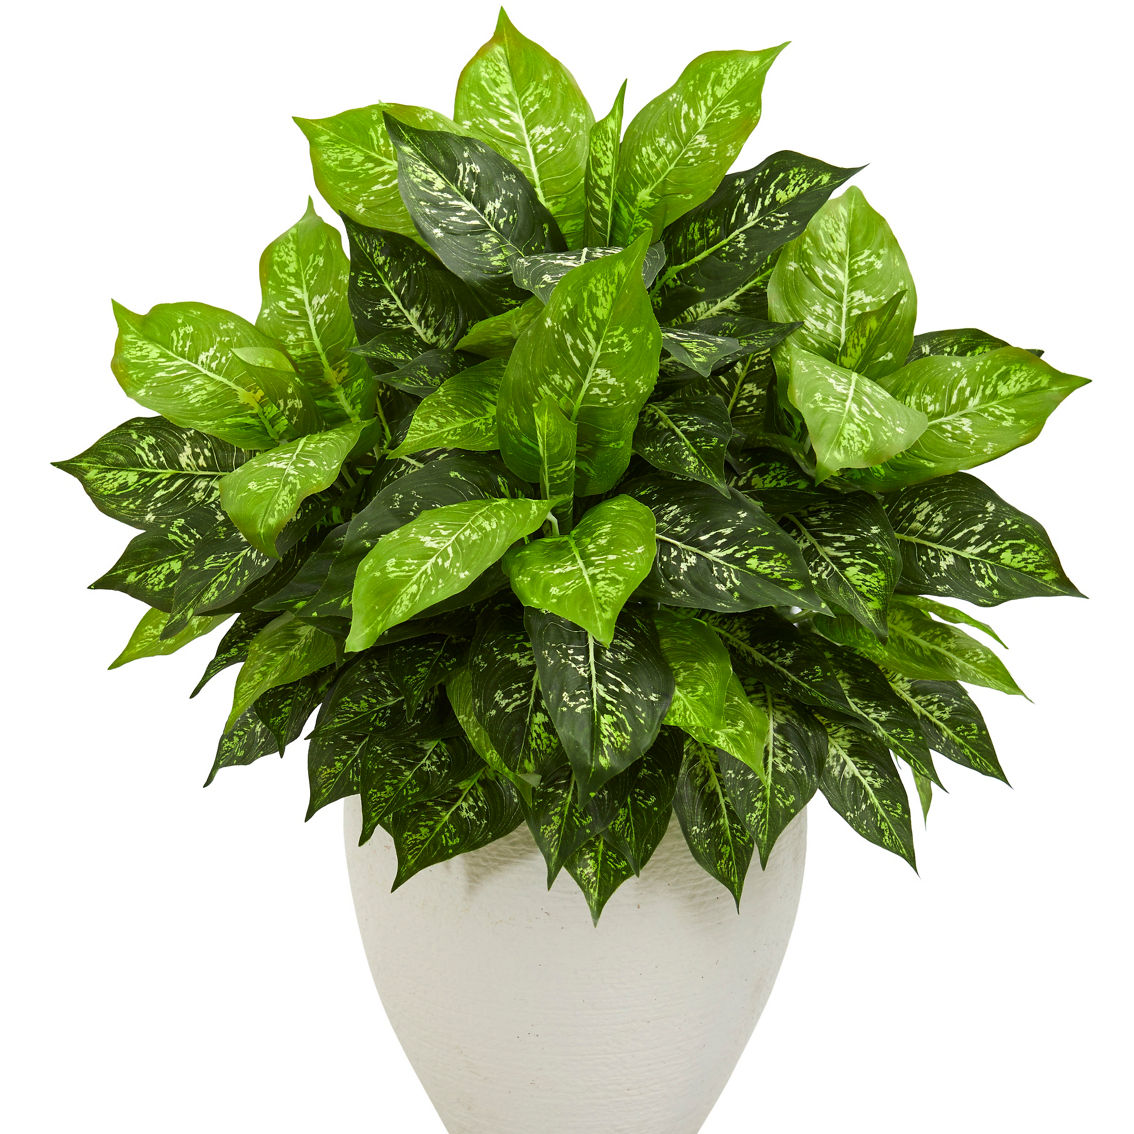 Nearly Natural Dieffenbachia Artificial Plant in White Planter - Image 2 of 2